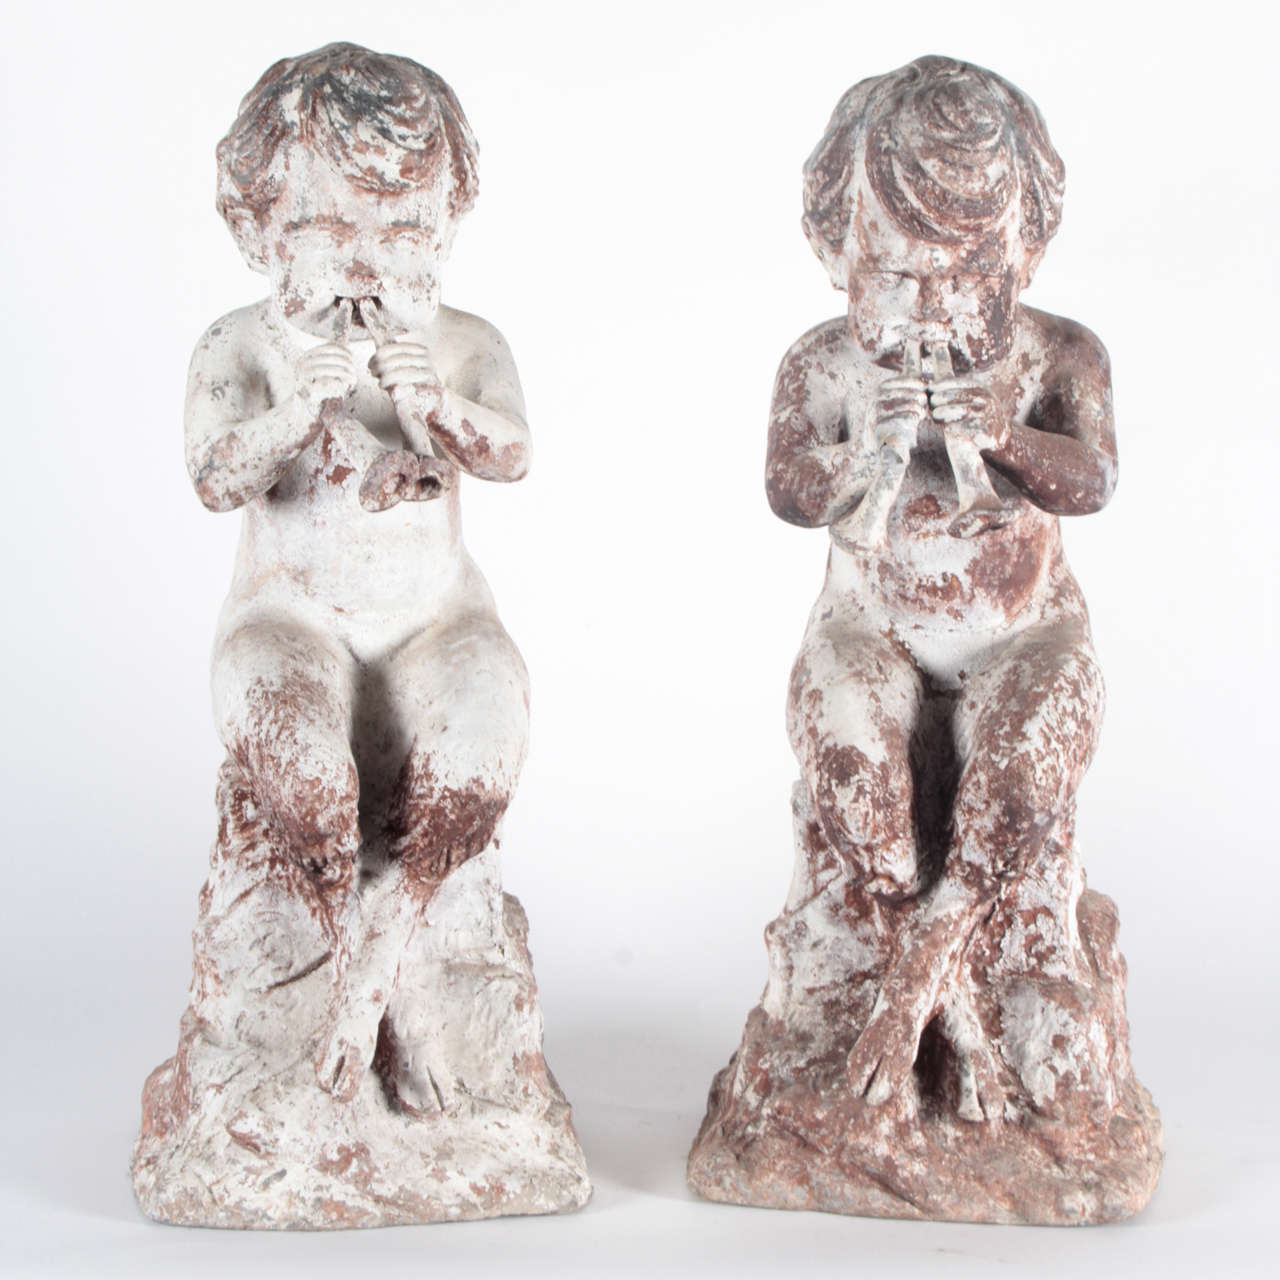 Here is a pair of lead child centaurs. Most likely late 19th early to early 20th Century.